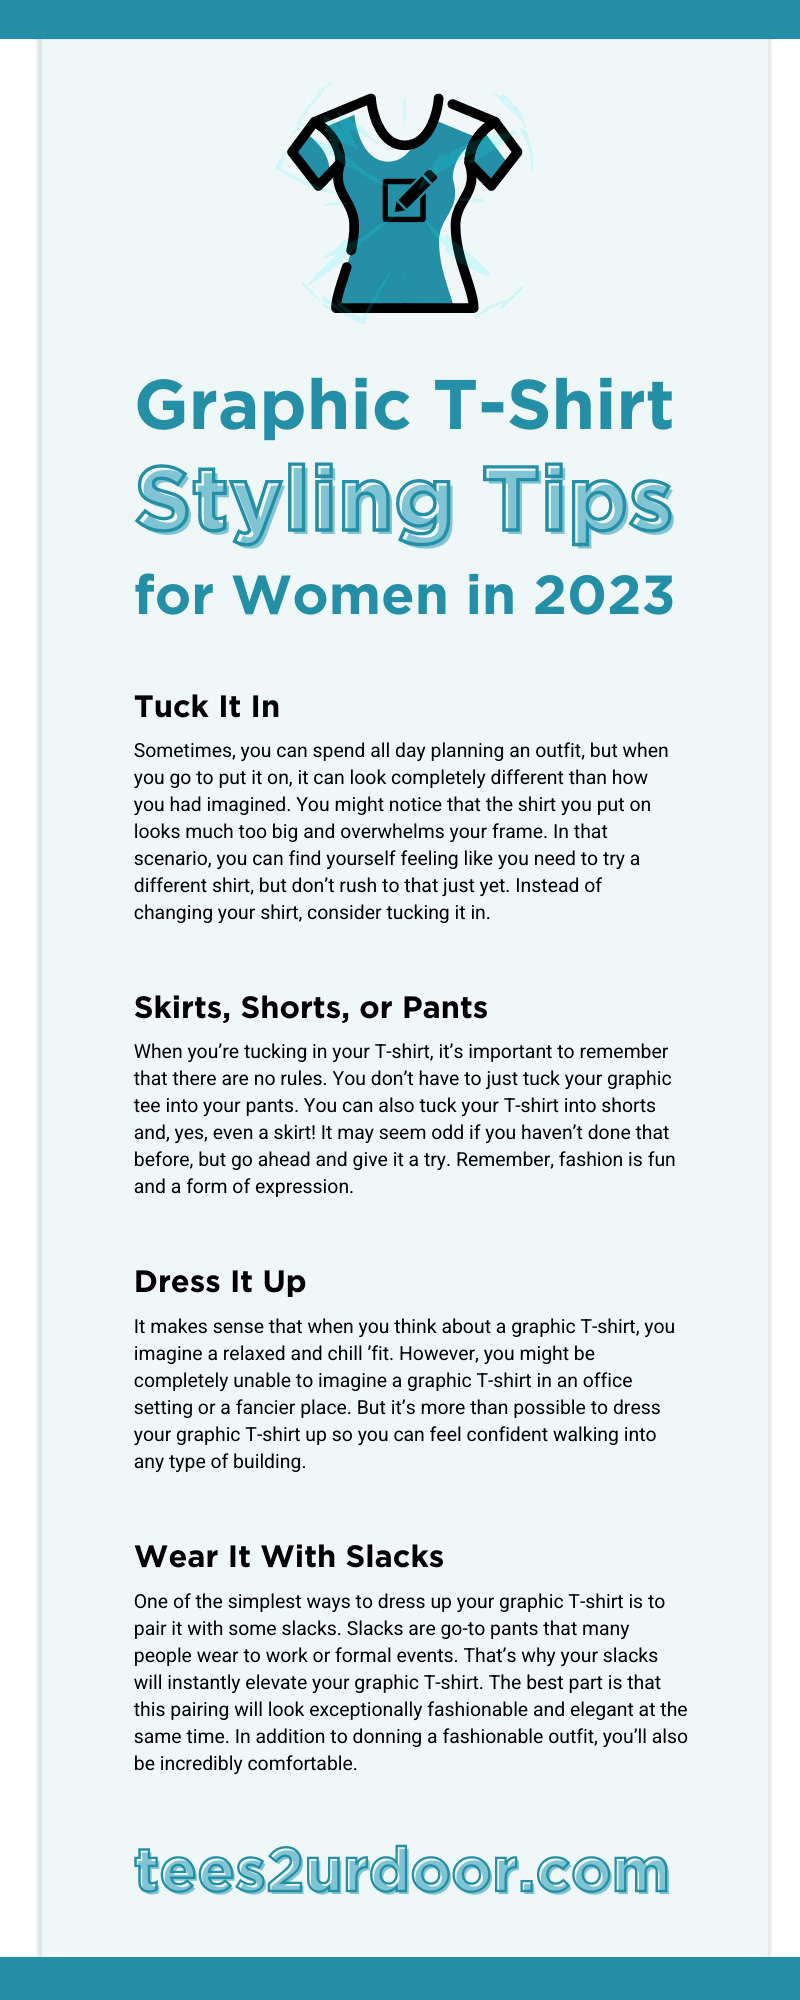 Graphic T-Shirt Styling Tips for Women in 2023